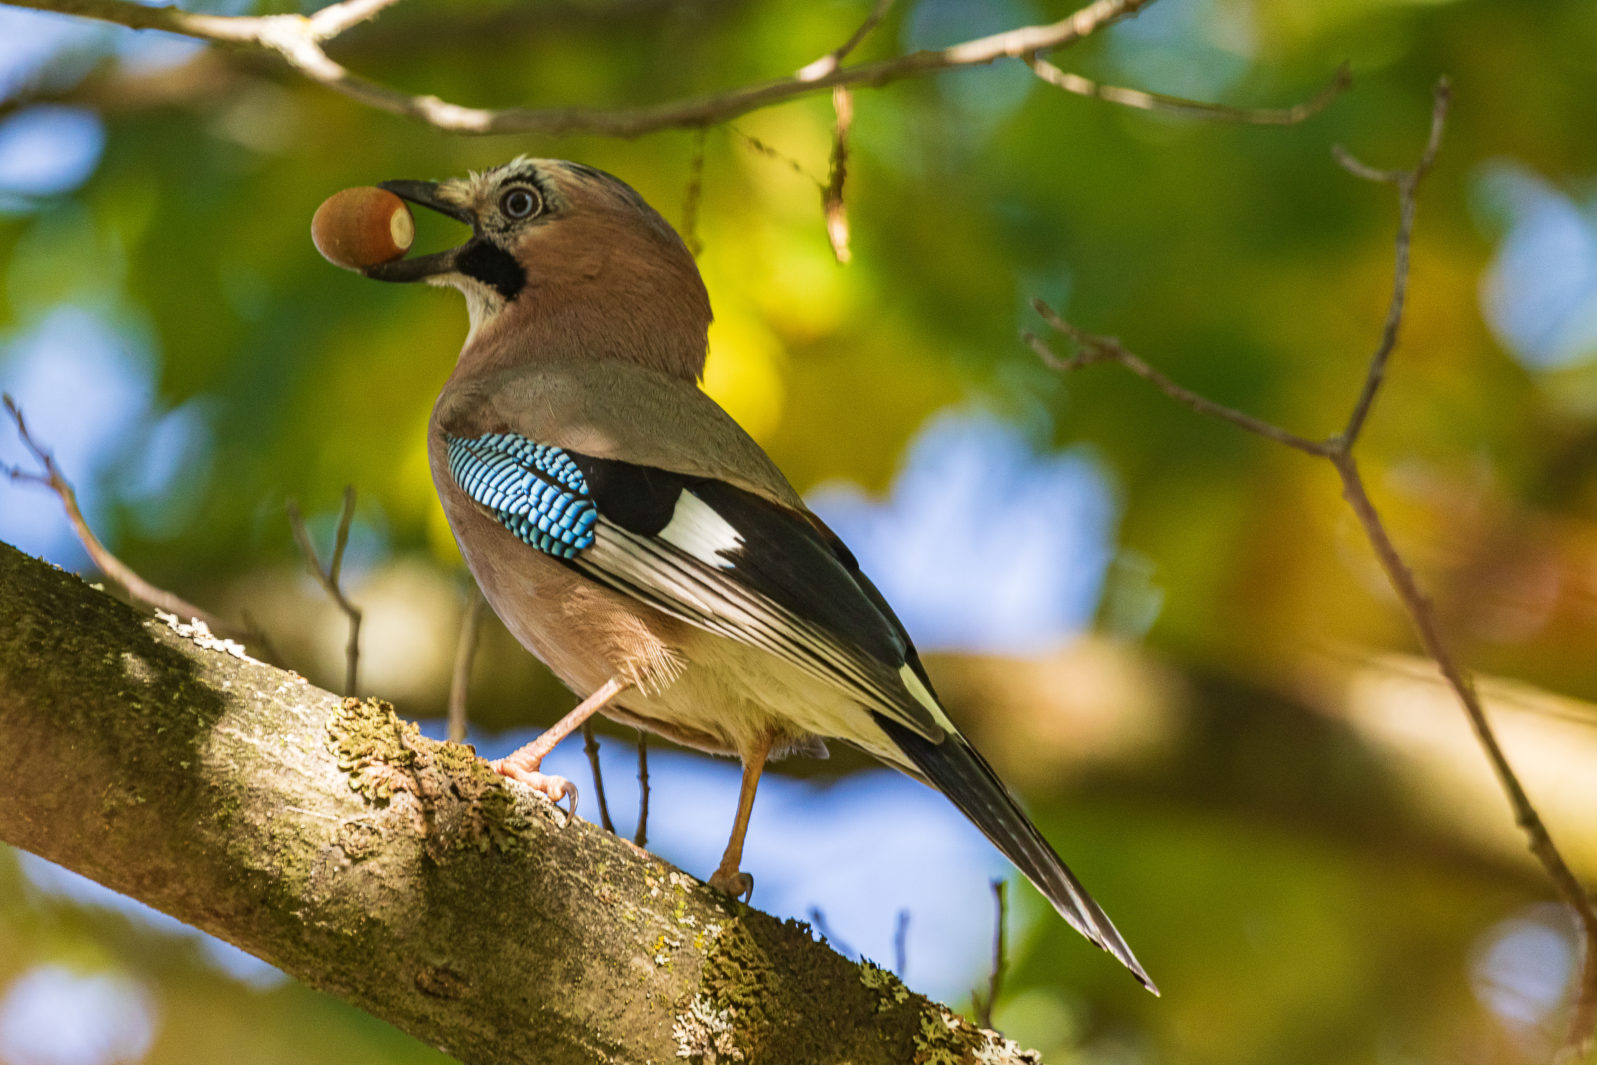 A  jay in its beak holds an acorn. A colorful Eurasian jay sits on a thick oak branch. Close-up. Autumn. Natural blurred background.  Wild nature.